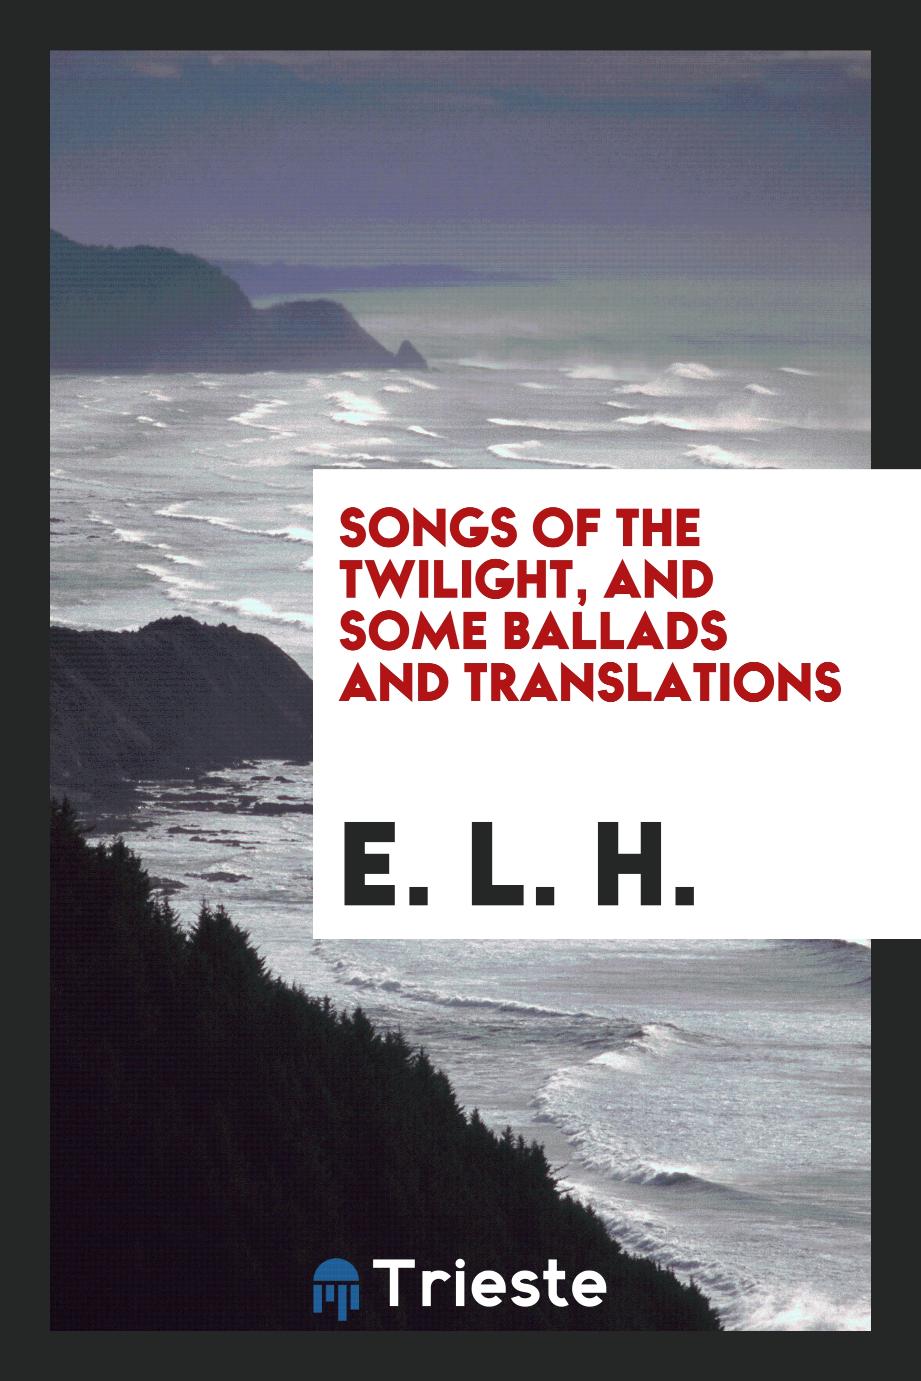 Songs of the twilight, and some ballads and translations